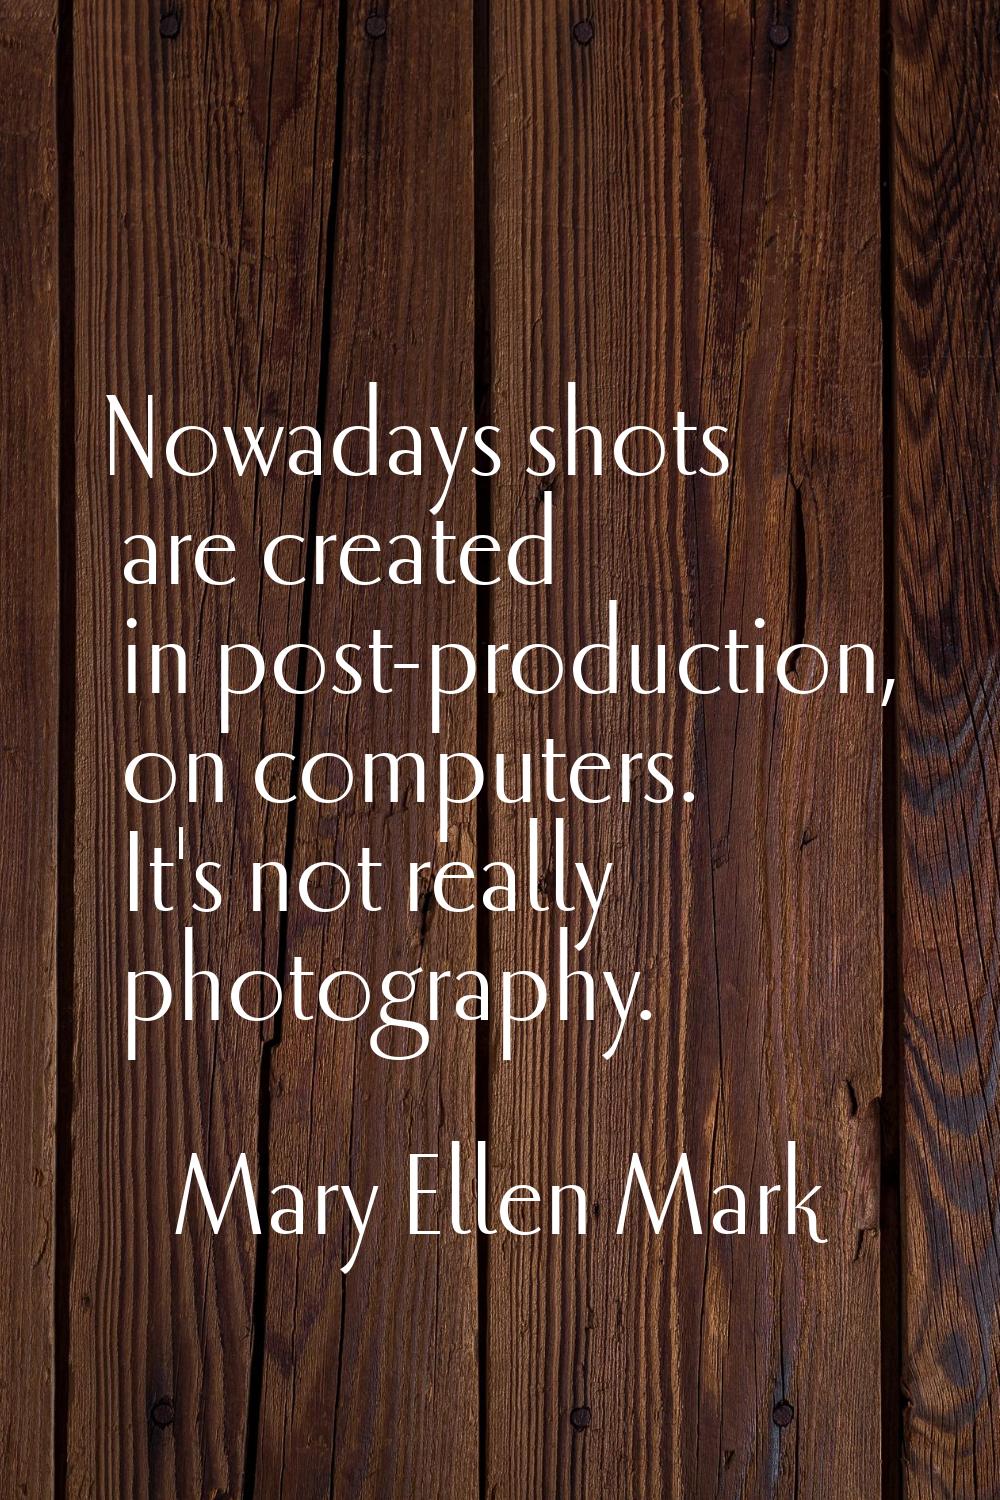 Nowadays shots are created in post-production, on computers. It's not really photography.